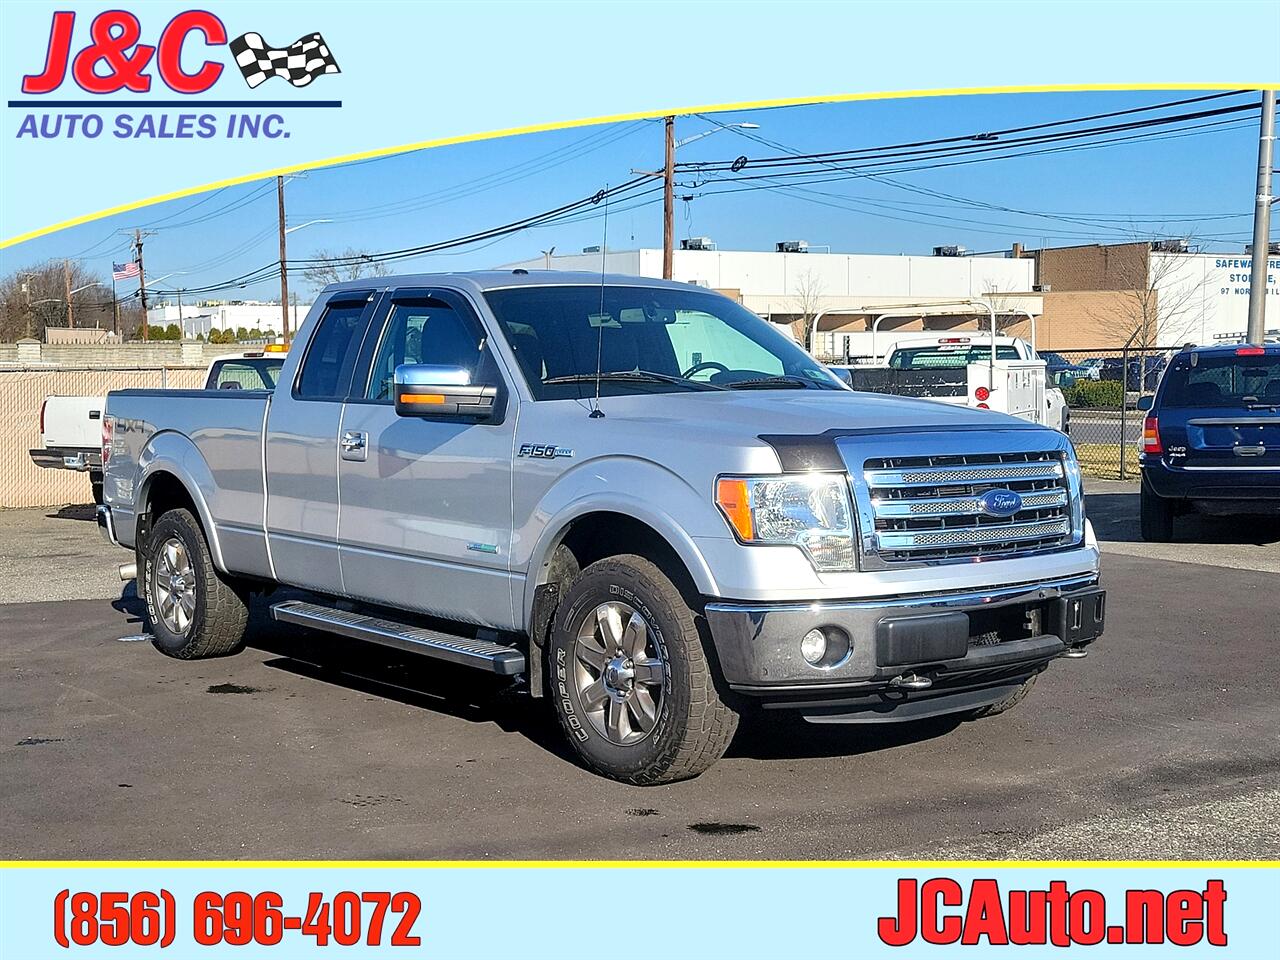 Ford F-150 4WD SuperCab 145" Lariat 2013